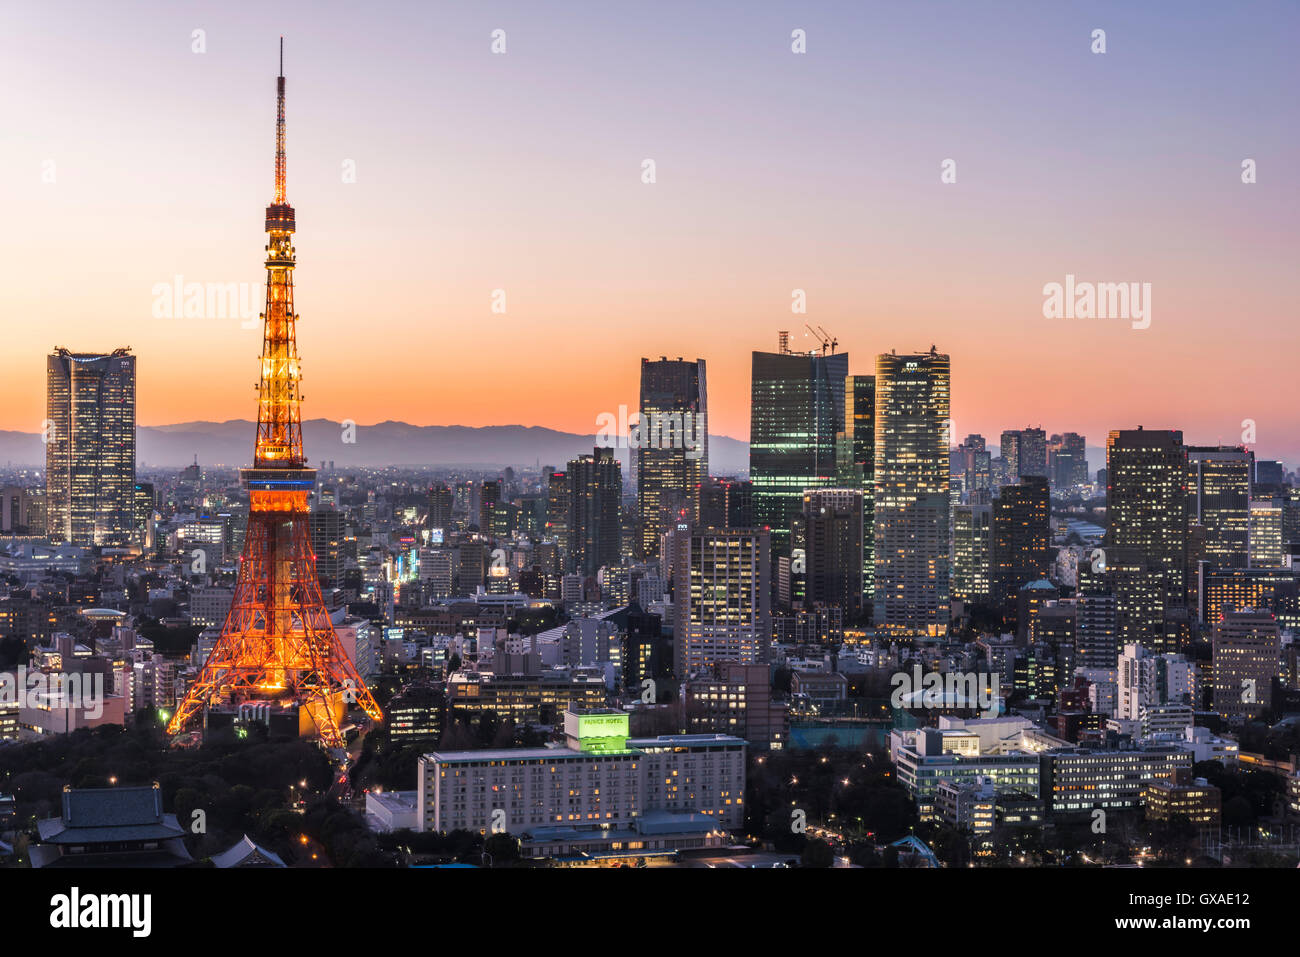 Tokyo Tower Roppongi Hills Evening High Resolution Stock Photography And Images Alamy